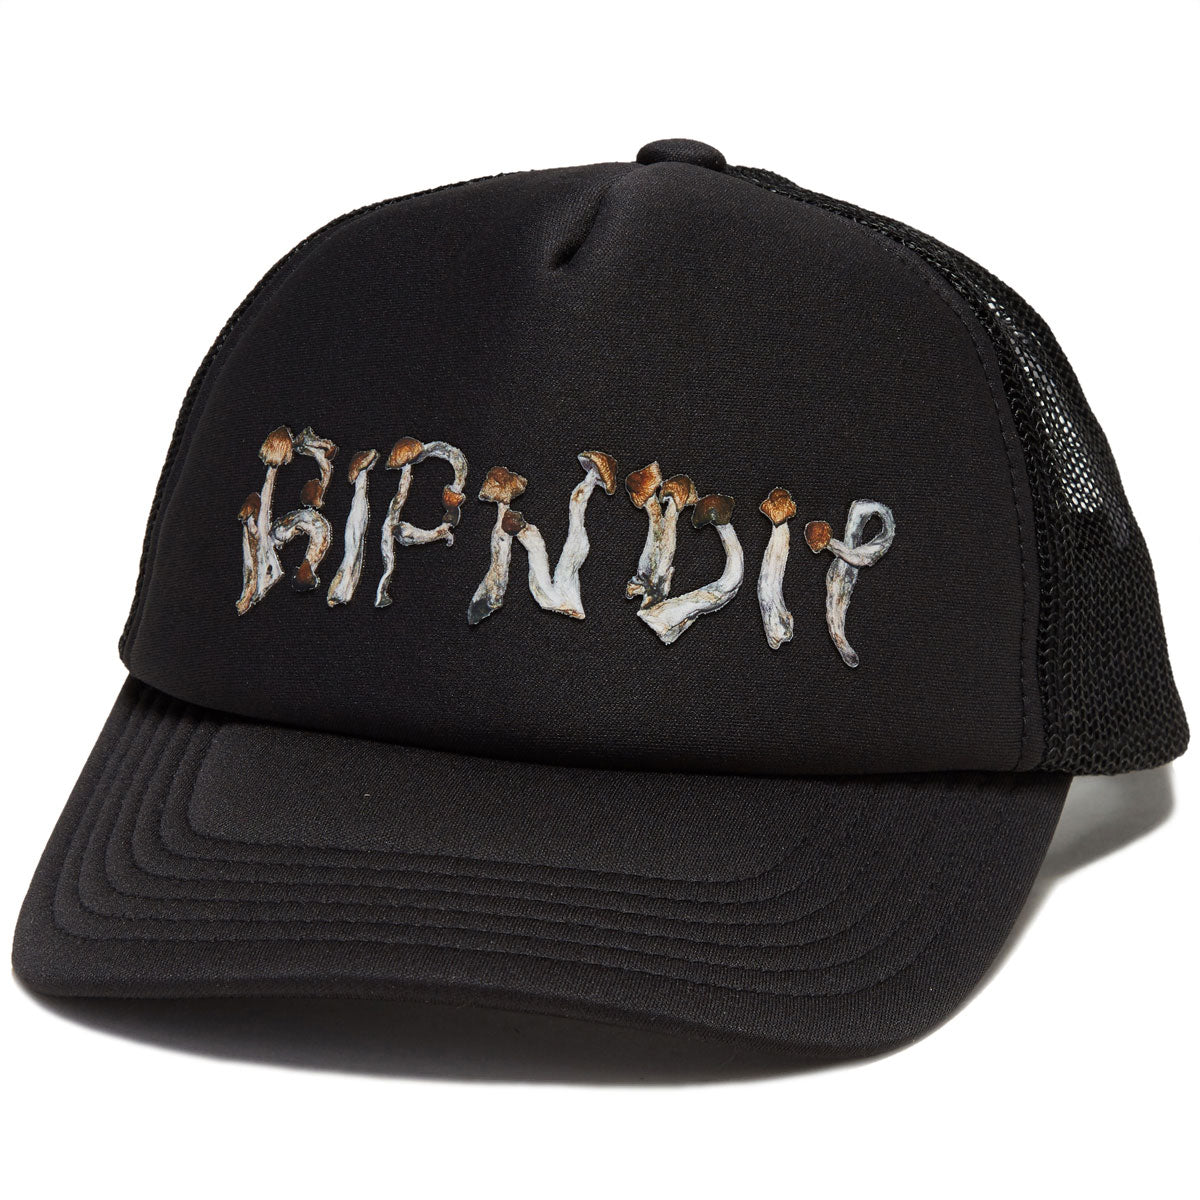 RIPNDIP Is This Real Life Trucker Hat - Black image 1